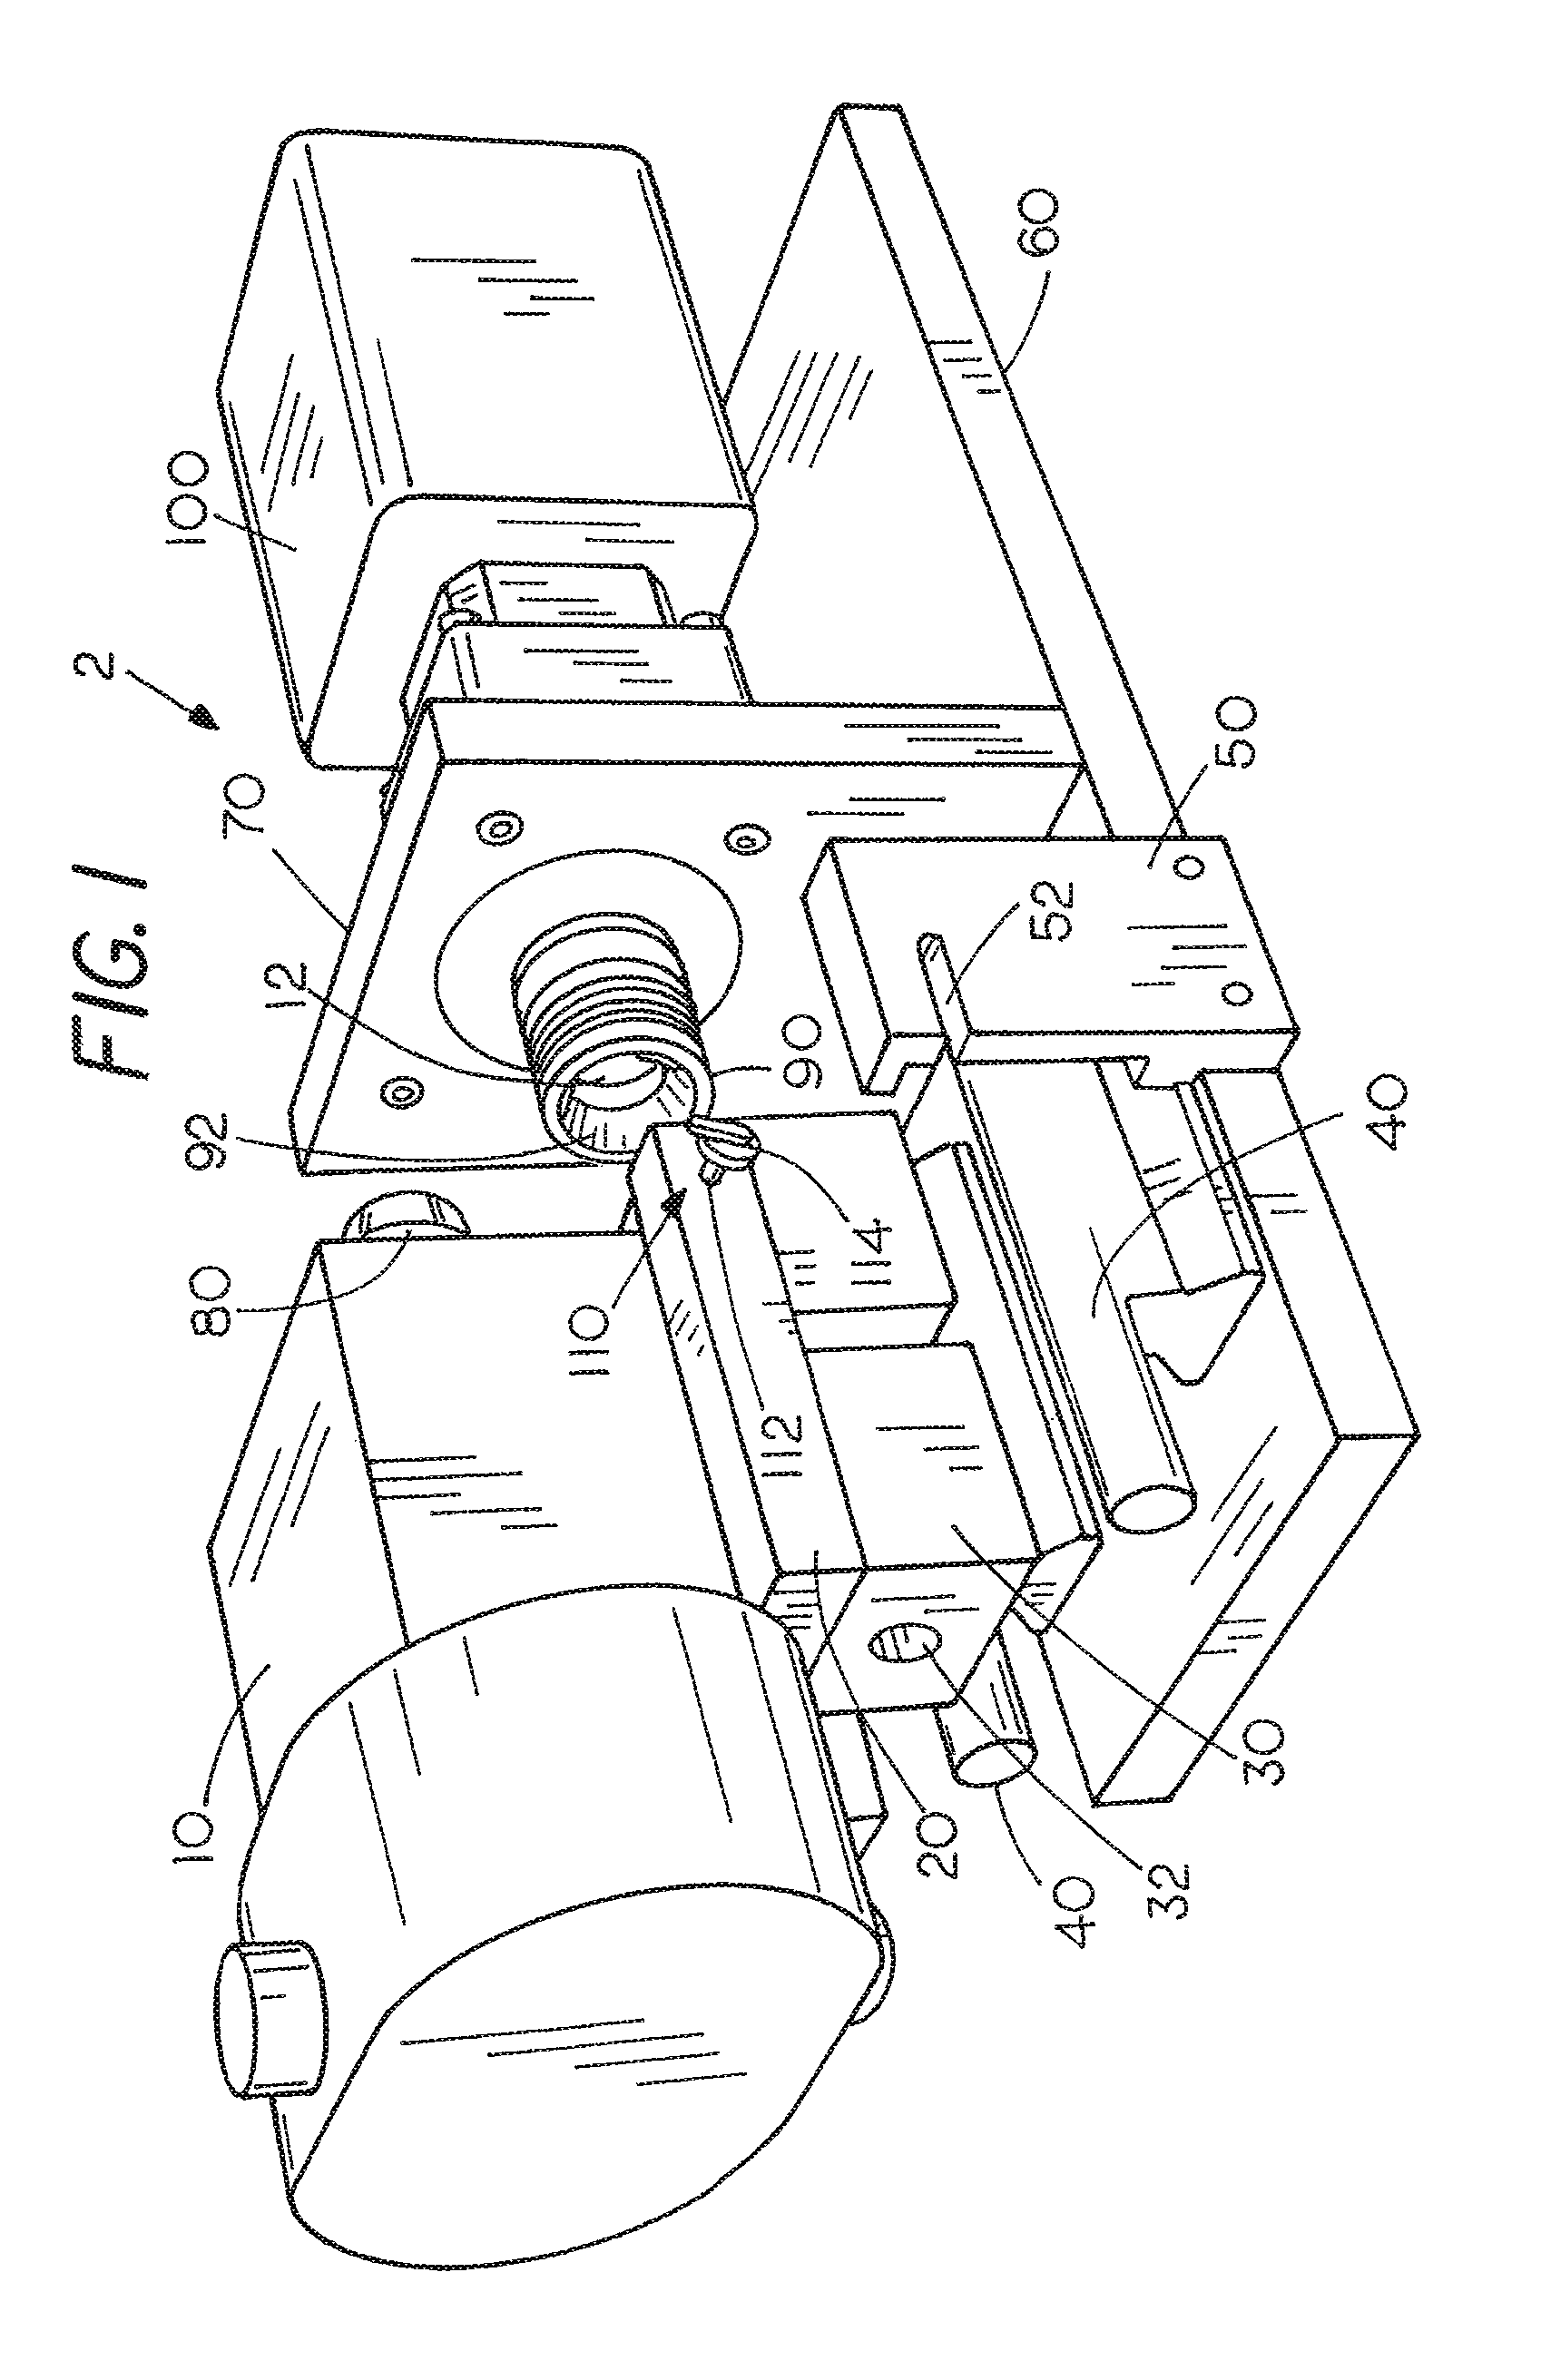 Quick-connect mounting apparatus for modular pump system or generator system